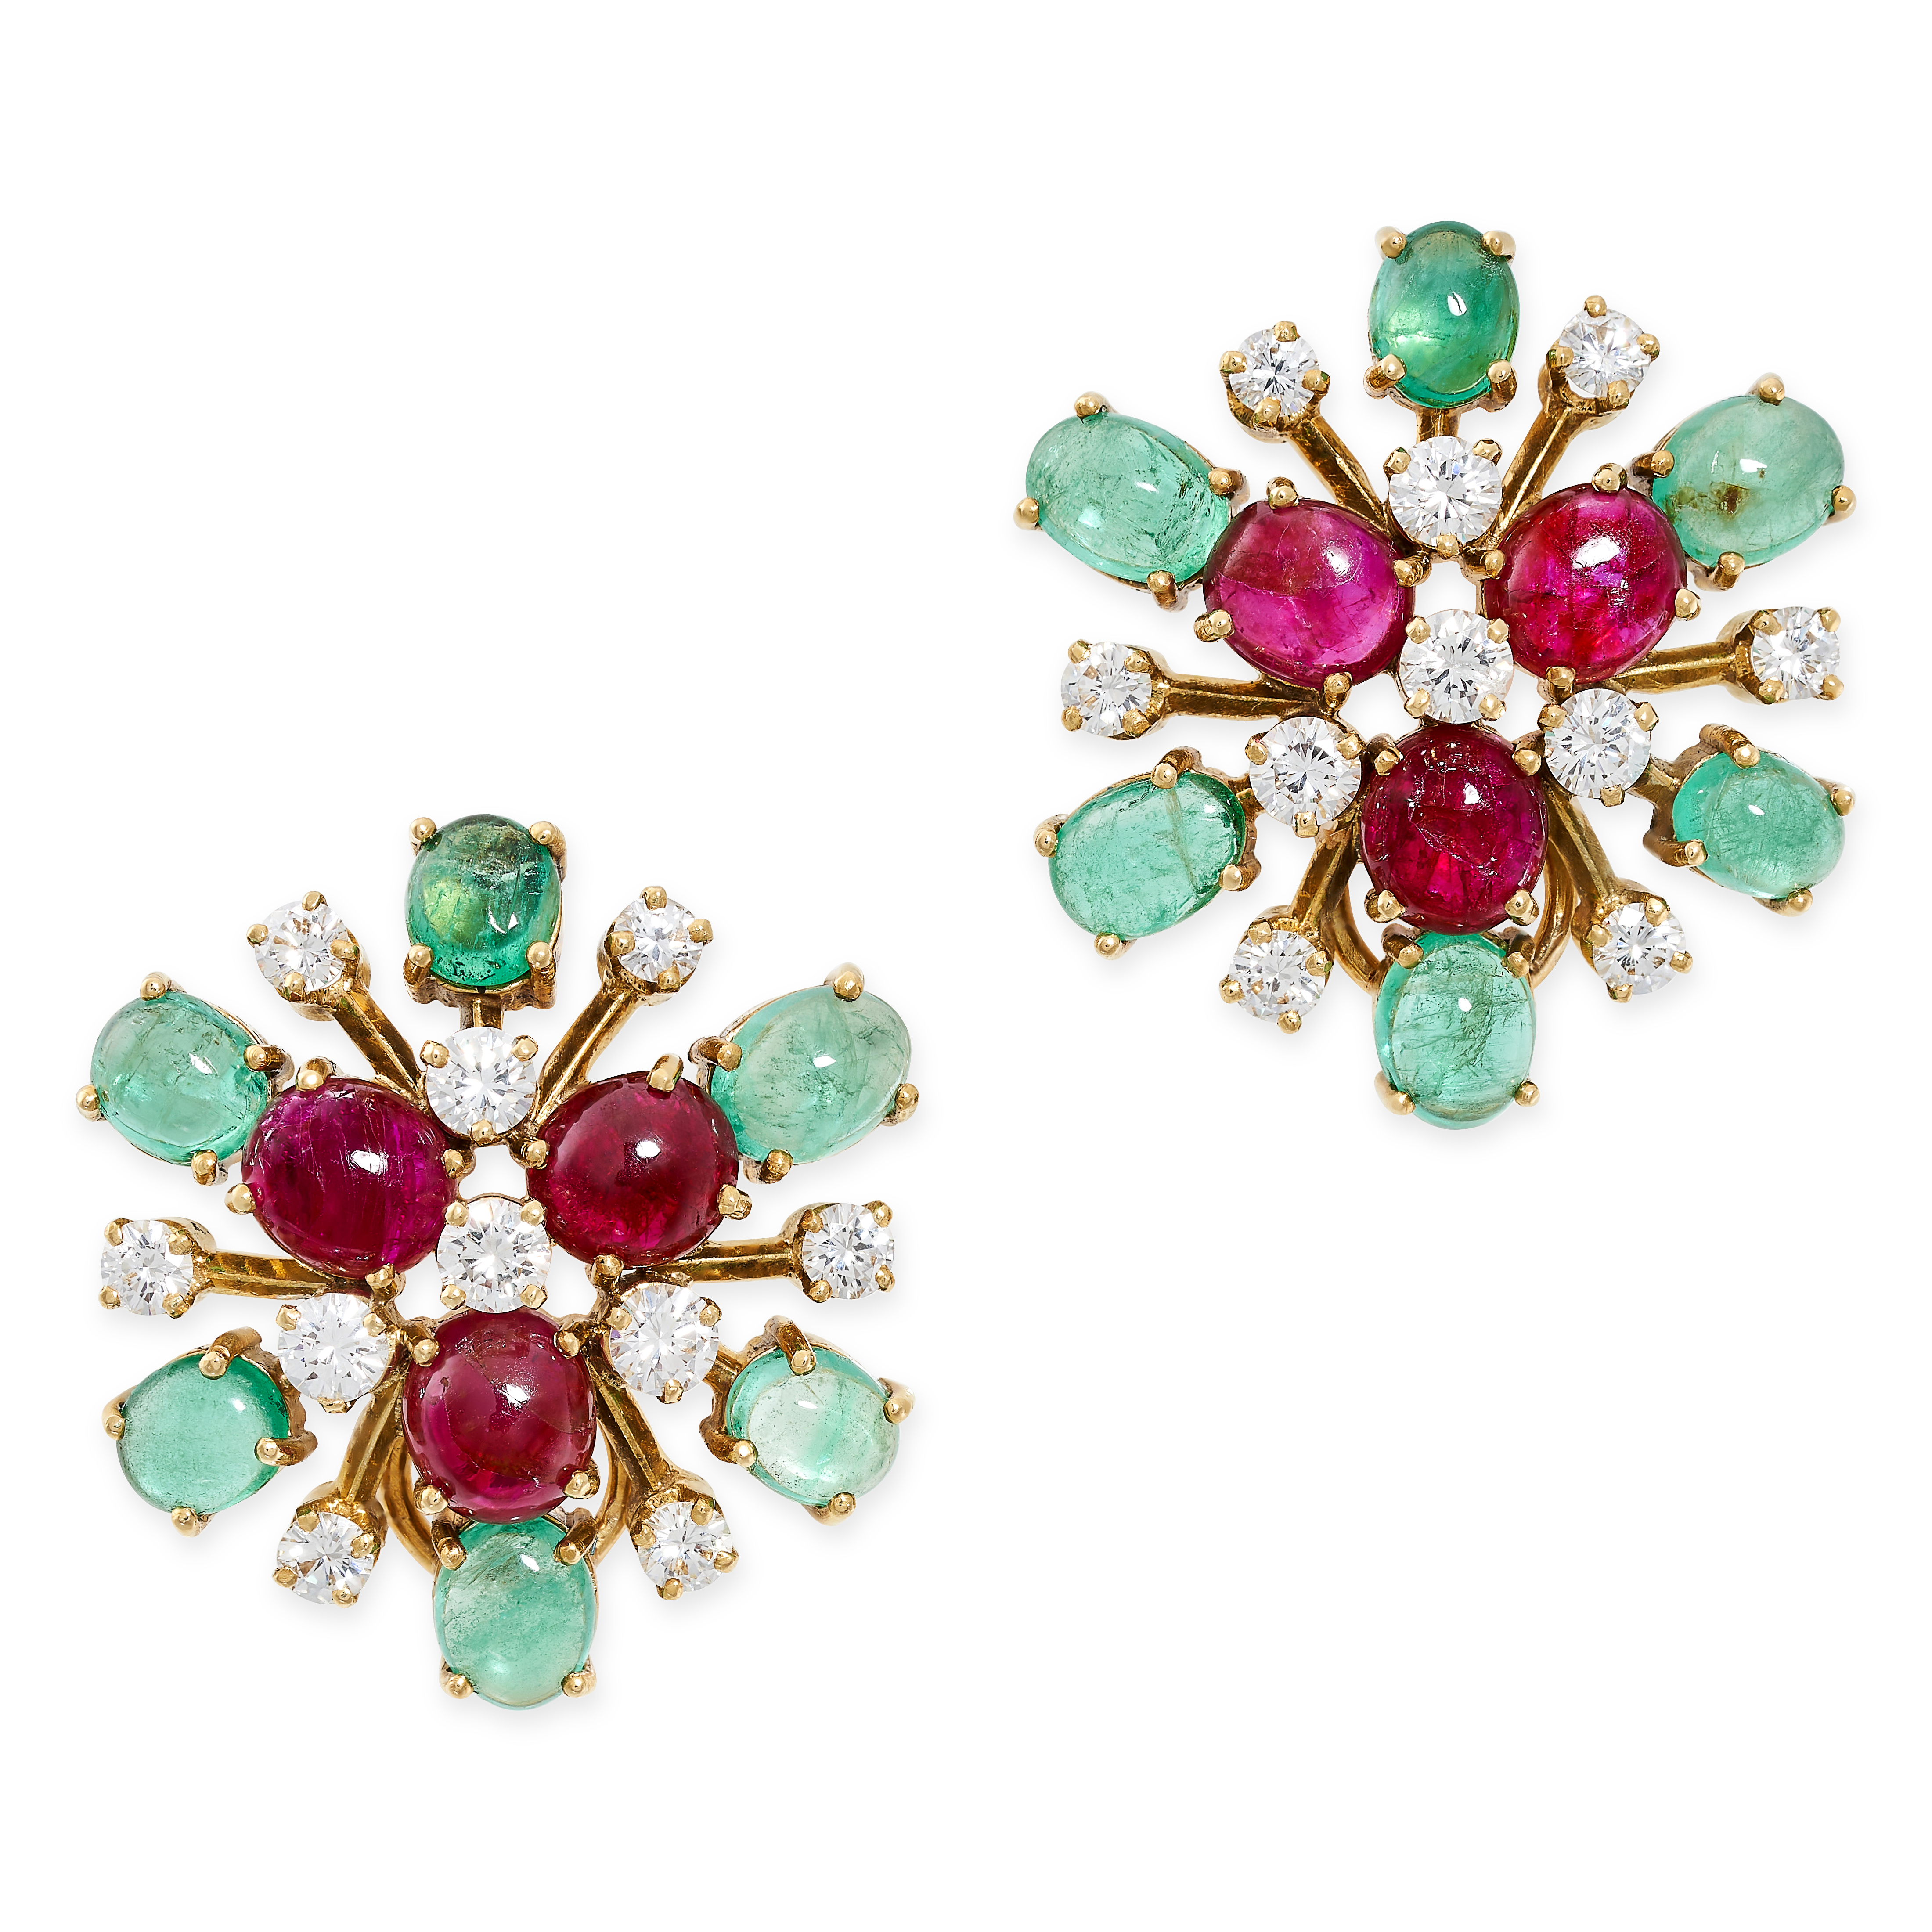 BULGARI, A PAIR OF VINTAGE EMERALD, RUBY AND DIAMOND EARRINGS in 18ct yellow gold, each designed